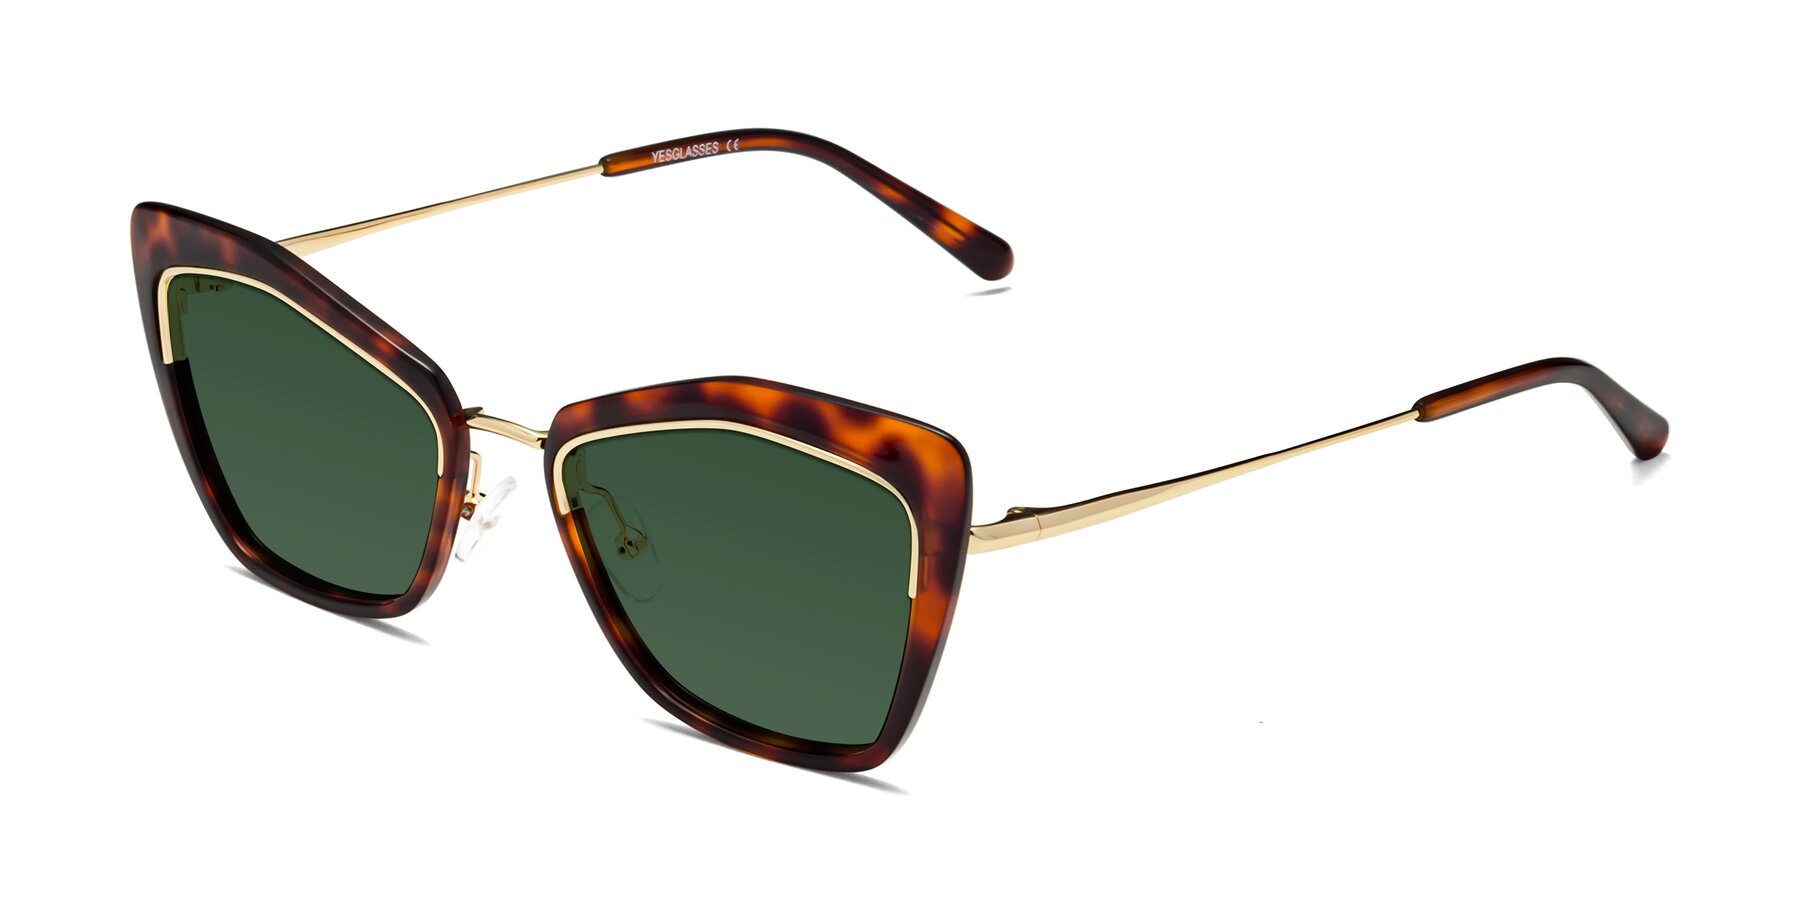 Angle of Lasso in Light Tortoise with Green Tinted Lenses